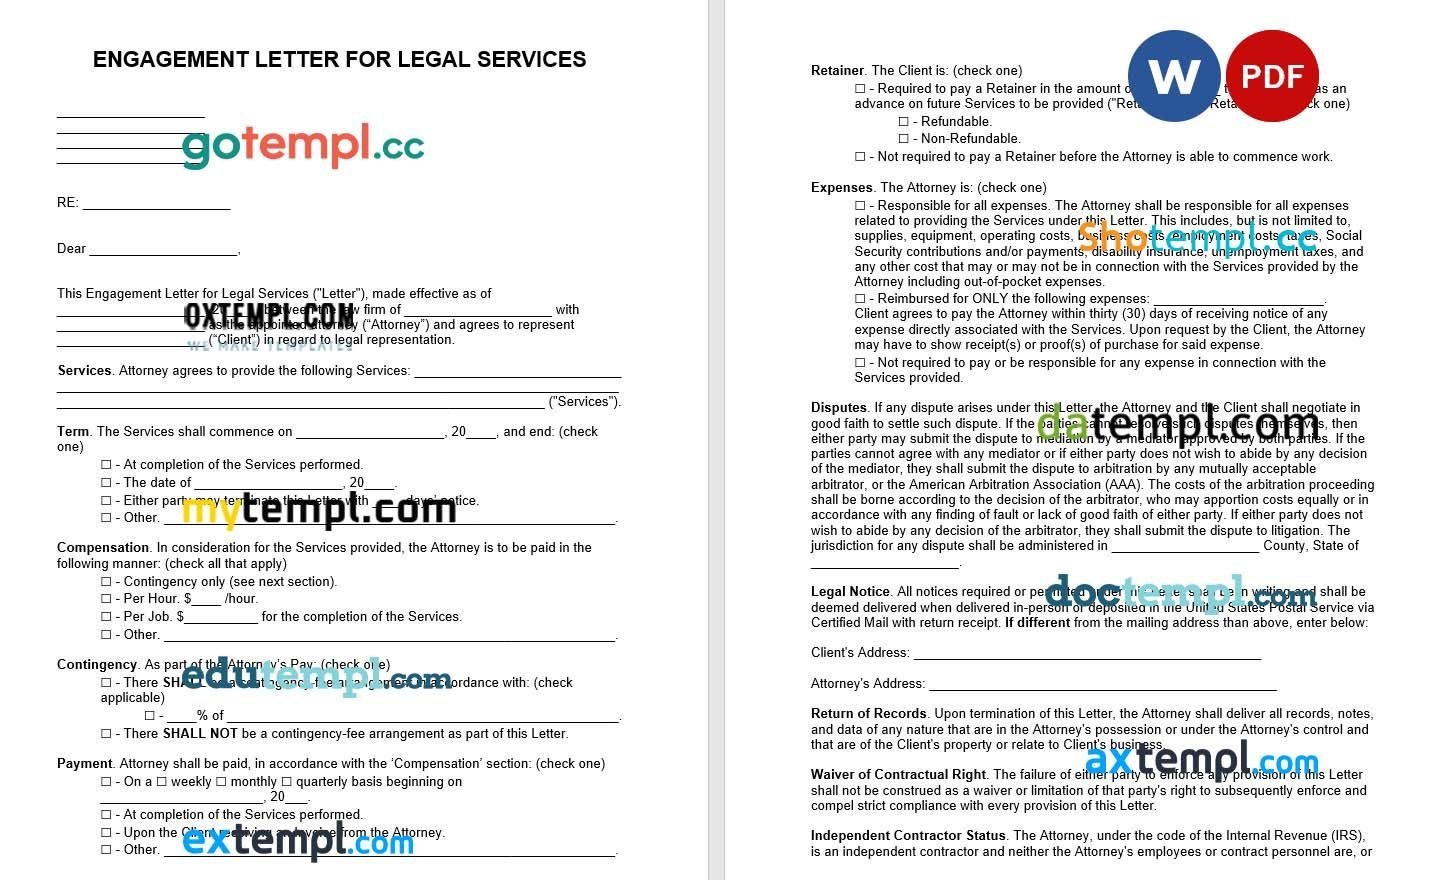 Lawyer Attorney Engagement Letter example, fully editable